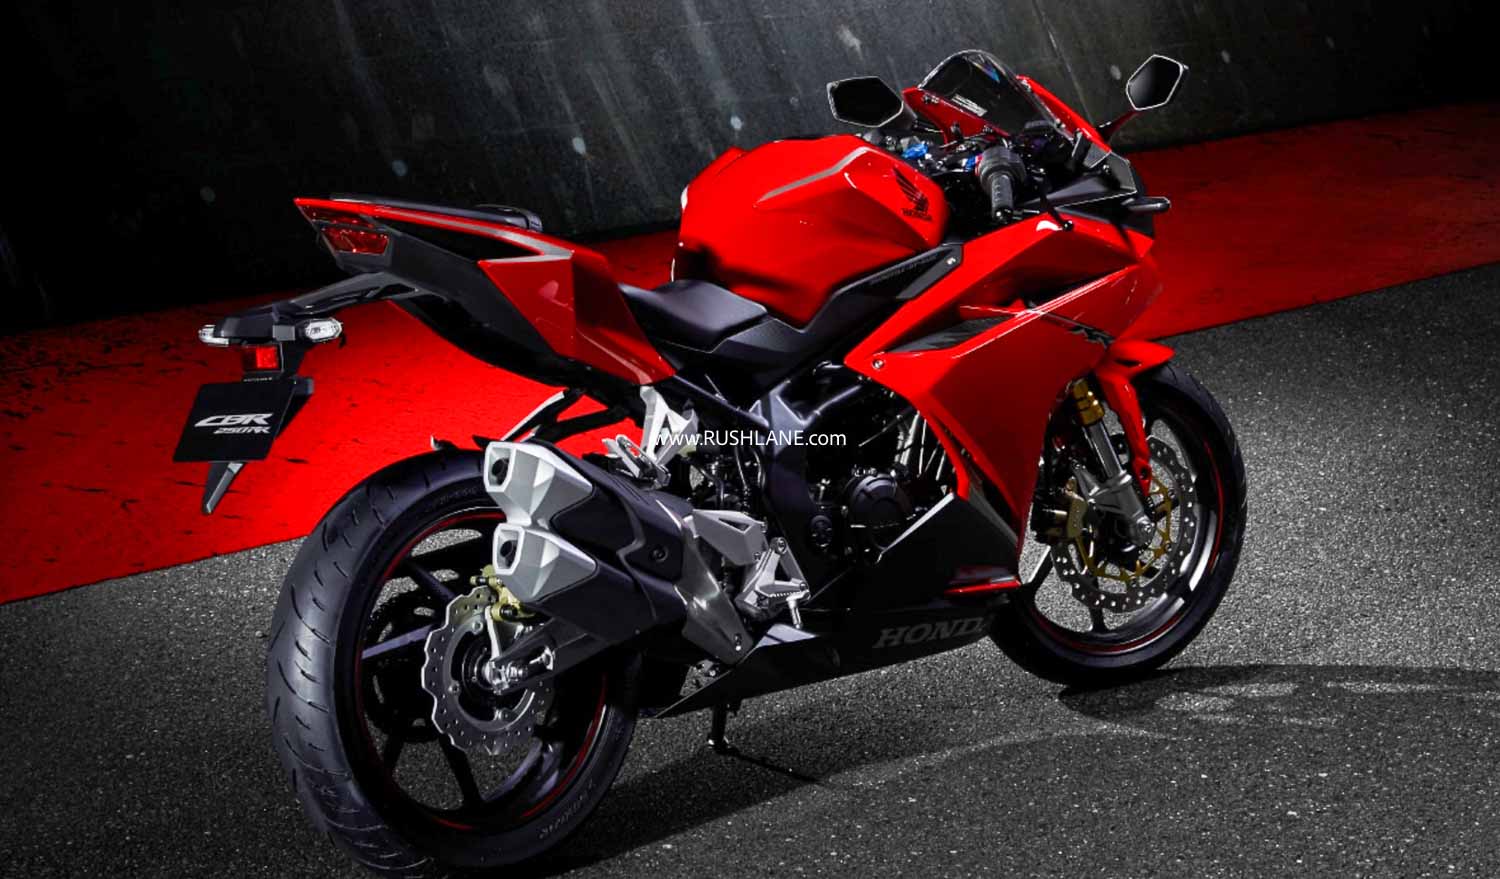 Honda Cbr250rr Details Revealed New Styling Colours Motor News Space All About The World Of Motors